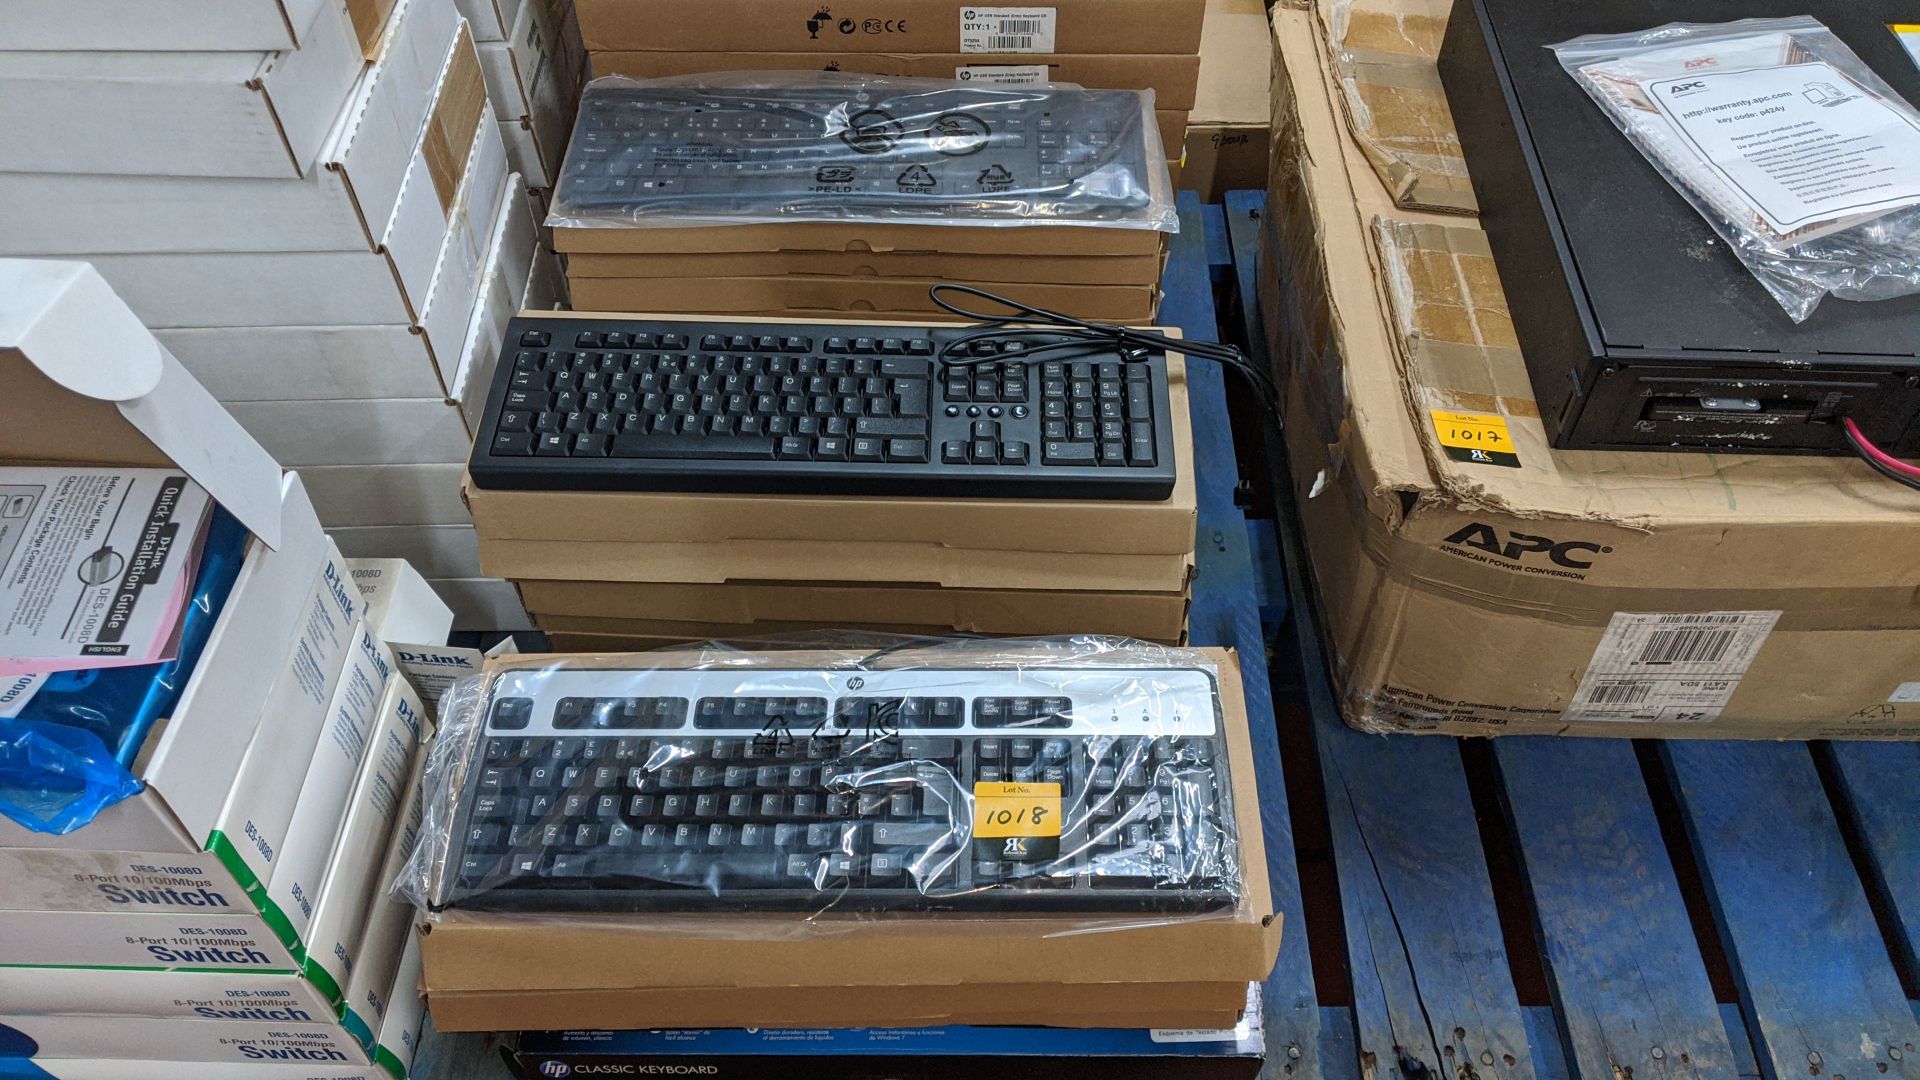 Approximately 23 assorted computer keyboards in 3 stacks. This is one of a large number of lots in